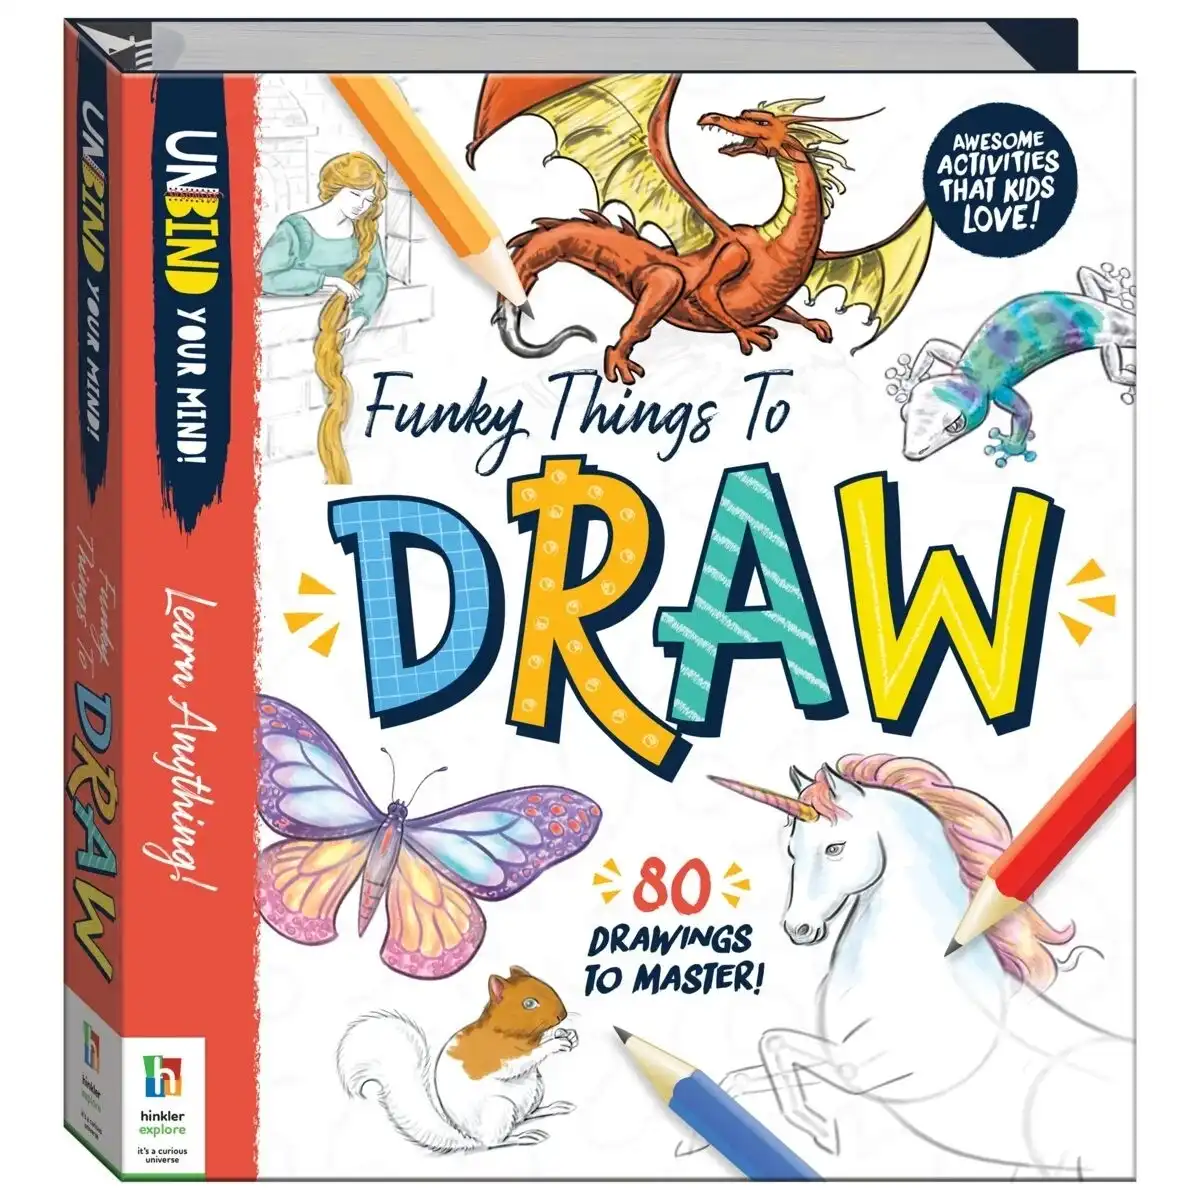 Unbind Your Mind!: Funky Things to Draw